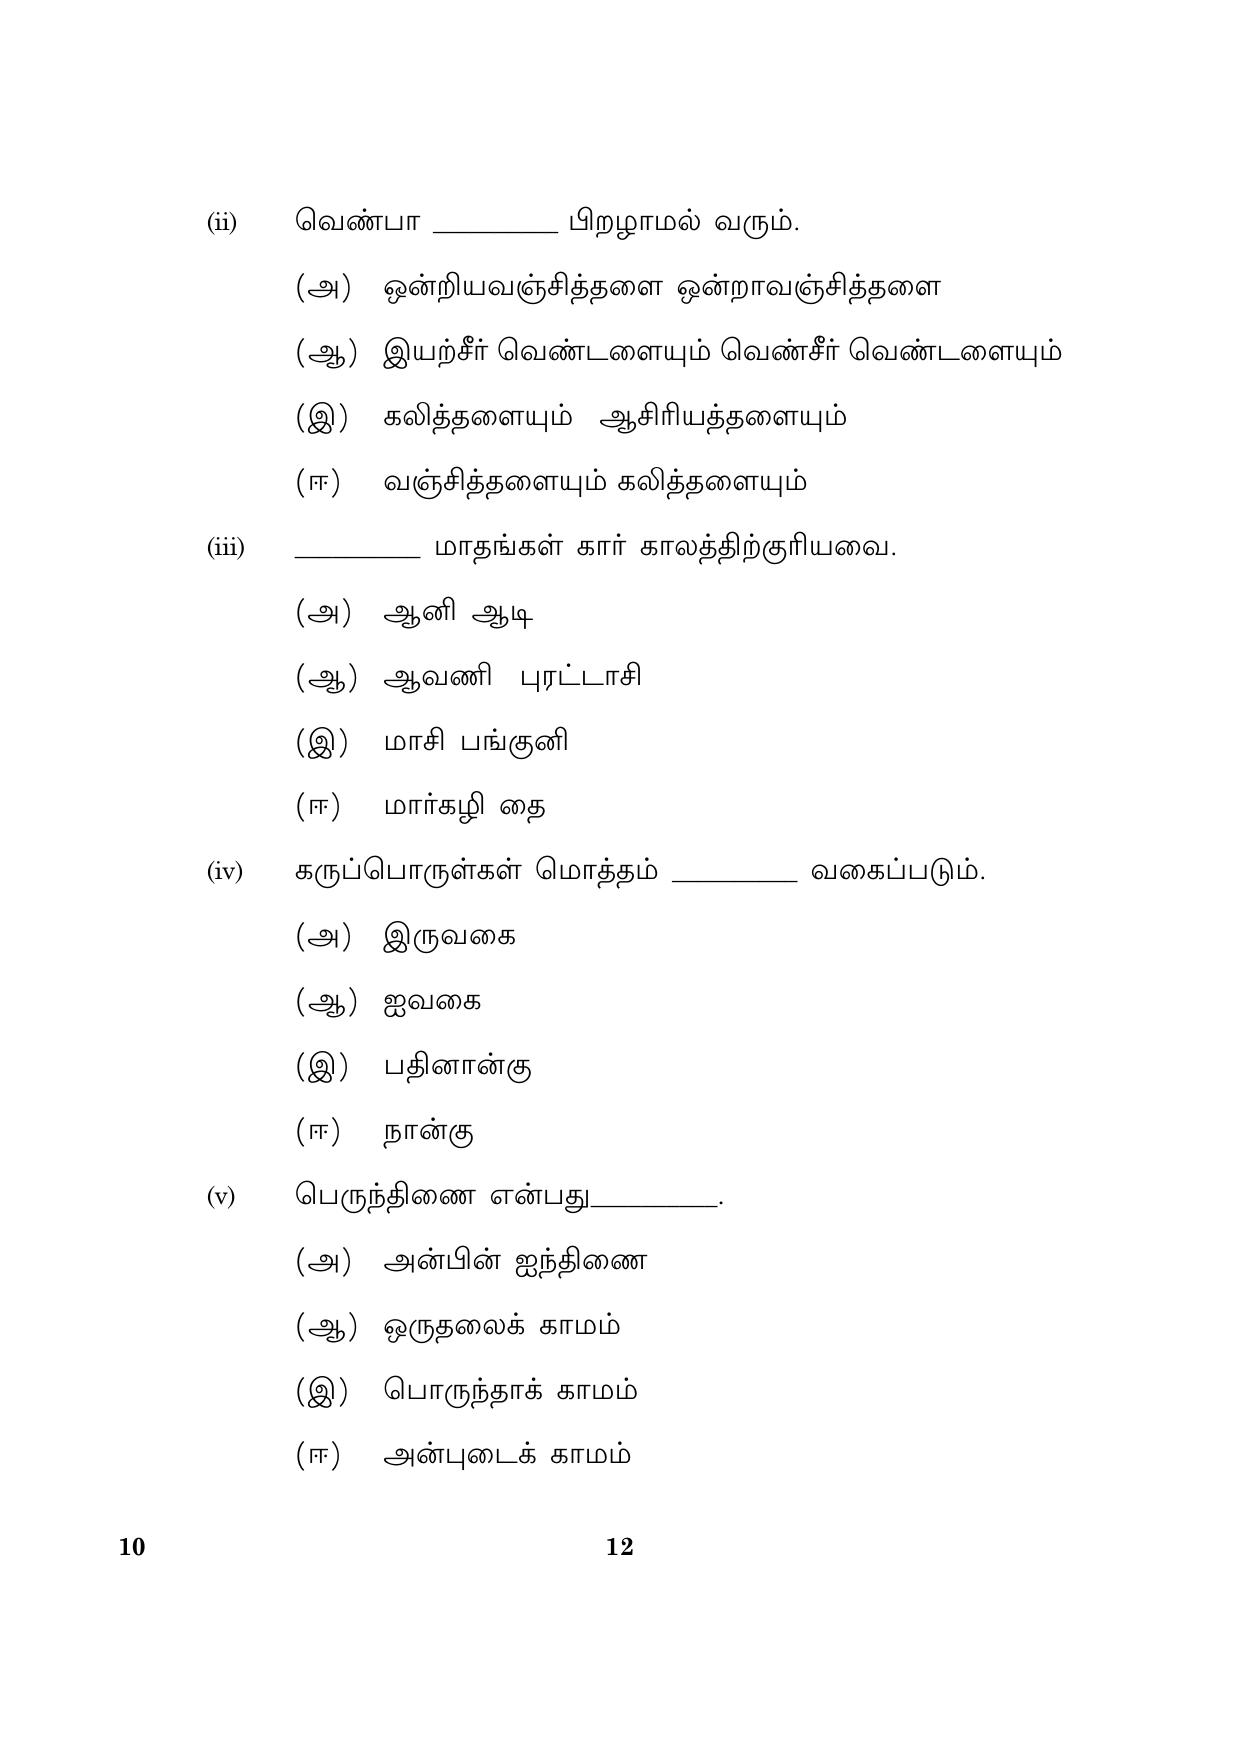 CBSE Class 10 010 Tamil 2016 Question Paper - Page 12